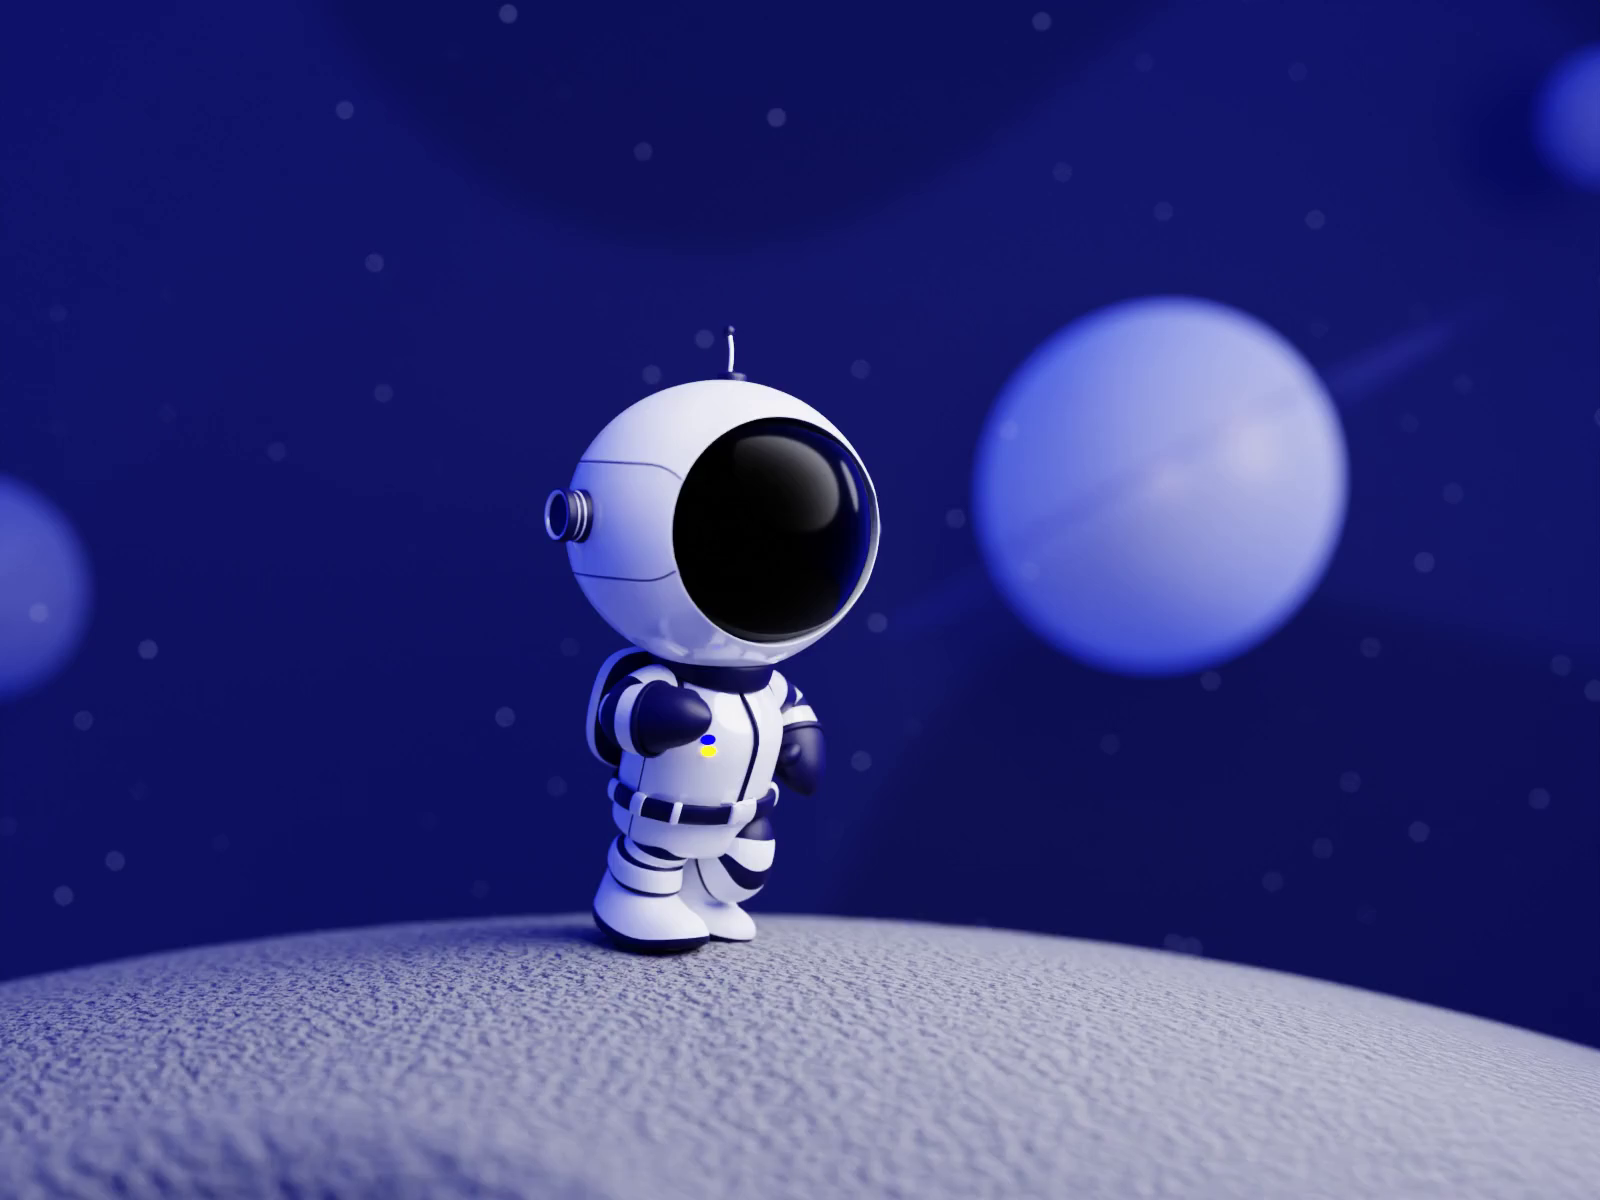 3d Space Background Images - Free Download on Freepik